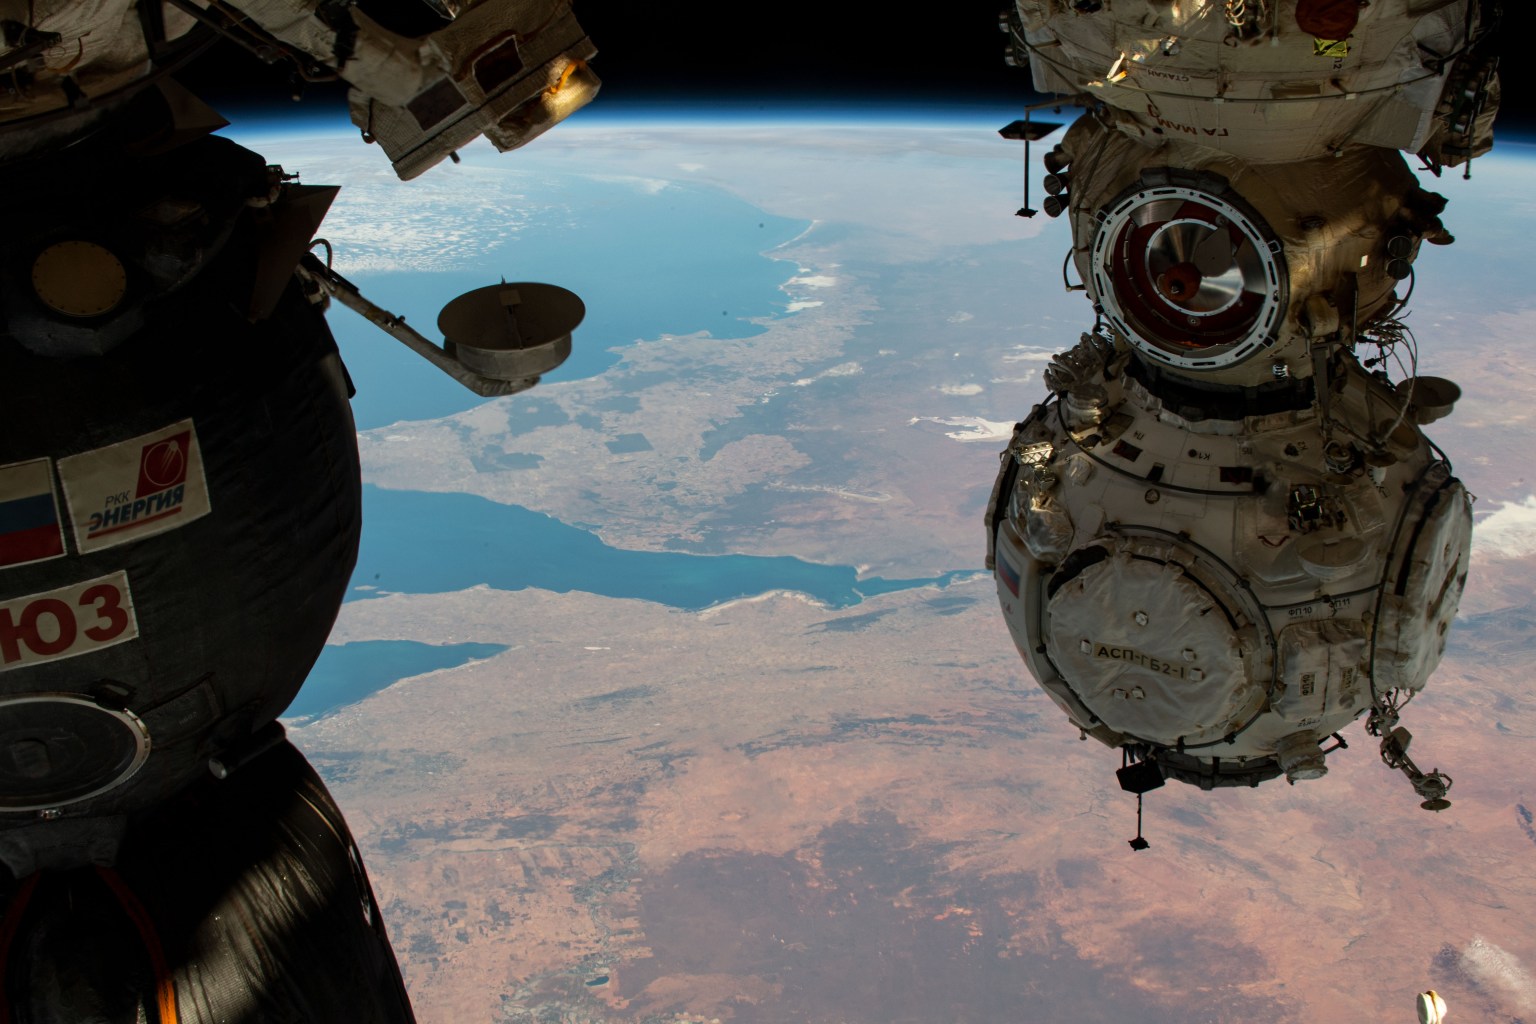 The Prichal docking module from Roscosmos is pictured attached to the Nauka multipurpose laboratory module as the International Space Station orbited 264 miles above South Australia. The three major bodies of water seen in this photograph are, from top to bottom, the Great Australian Bight, Spencer Gulf, and St. Vincent Gulf. At left, is a portion of the Soyuz MS-19 crew ship docked to the Rassvet module.